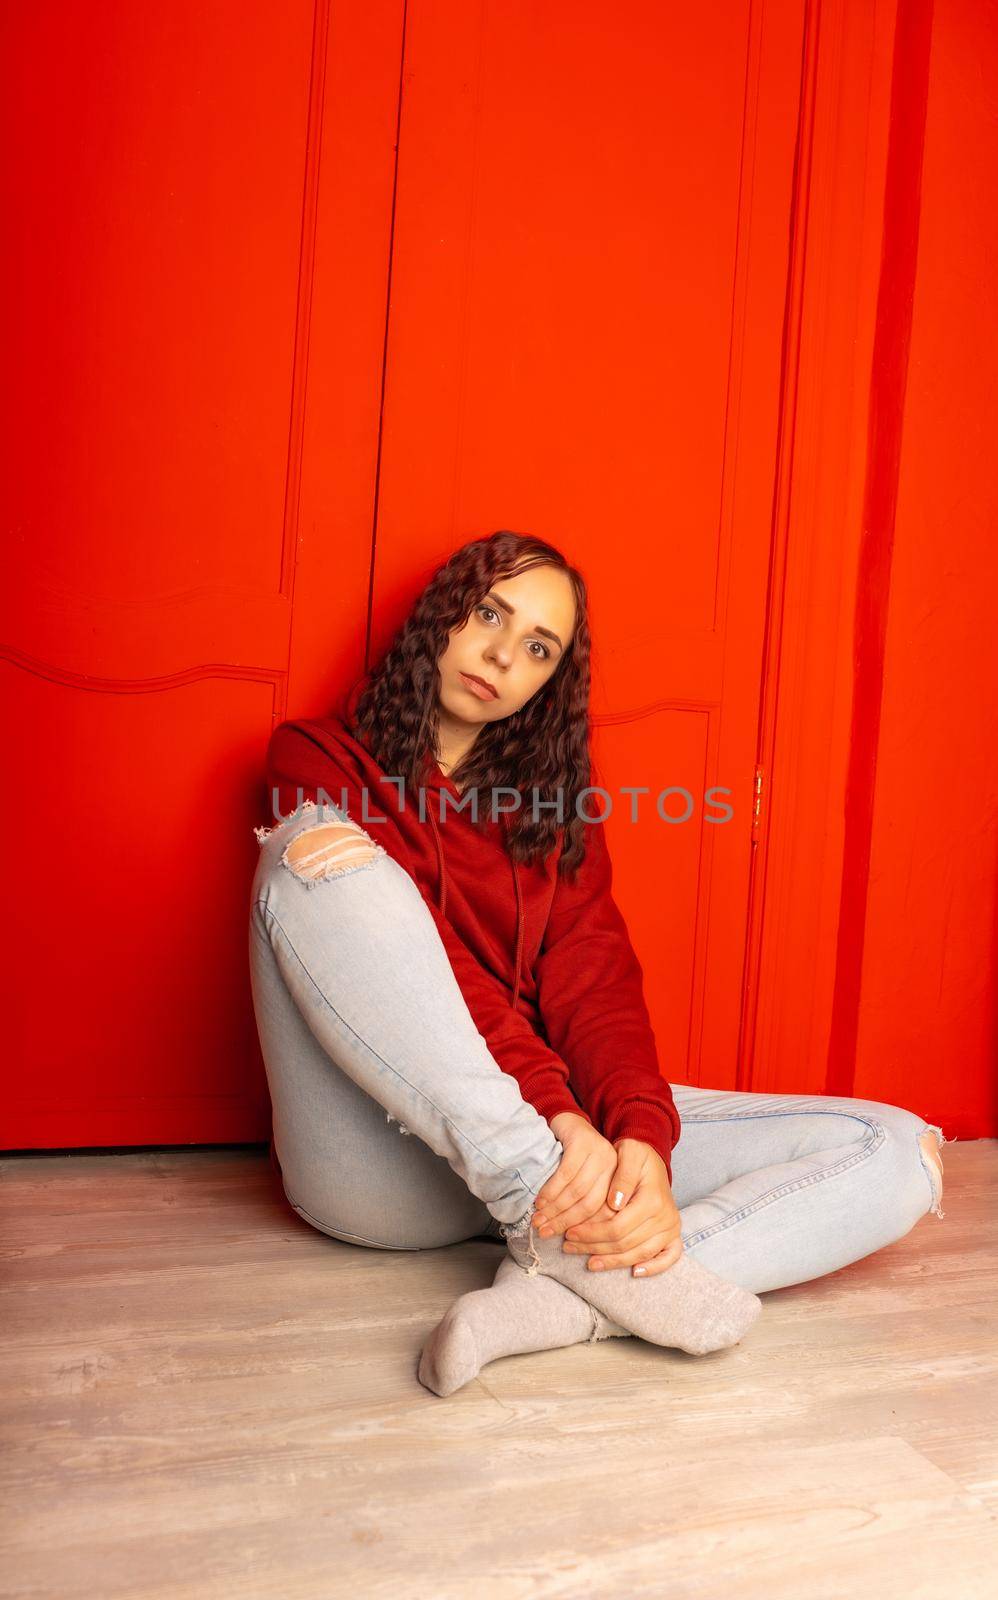 Young woman sitting on floor. Curly brunette poses near red wall